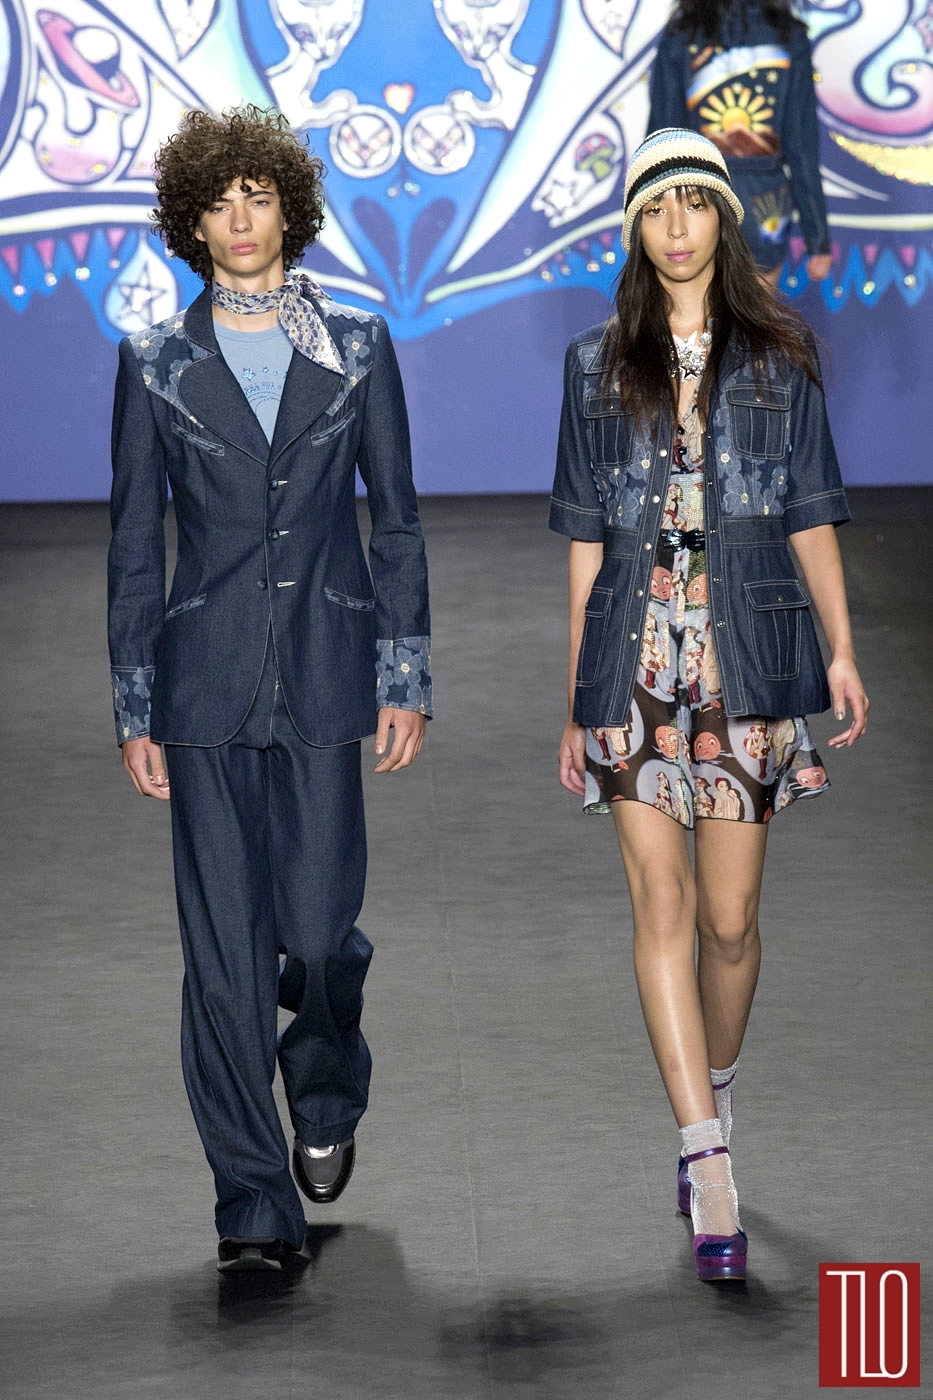 Spring-2015-Collections-Trends-Denim-Fashion-Tom-Lorenzo-Site-TLO (1)